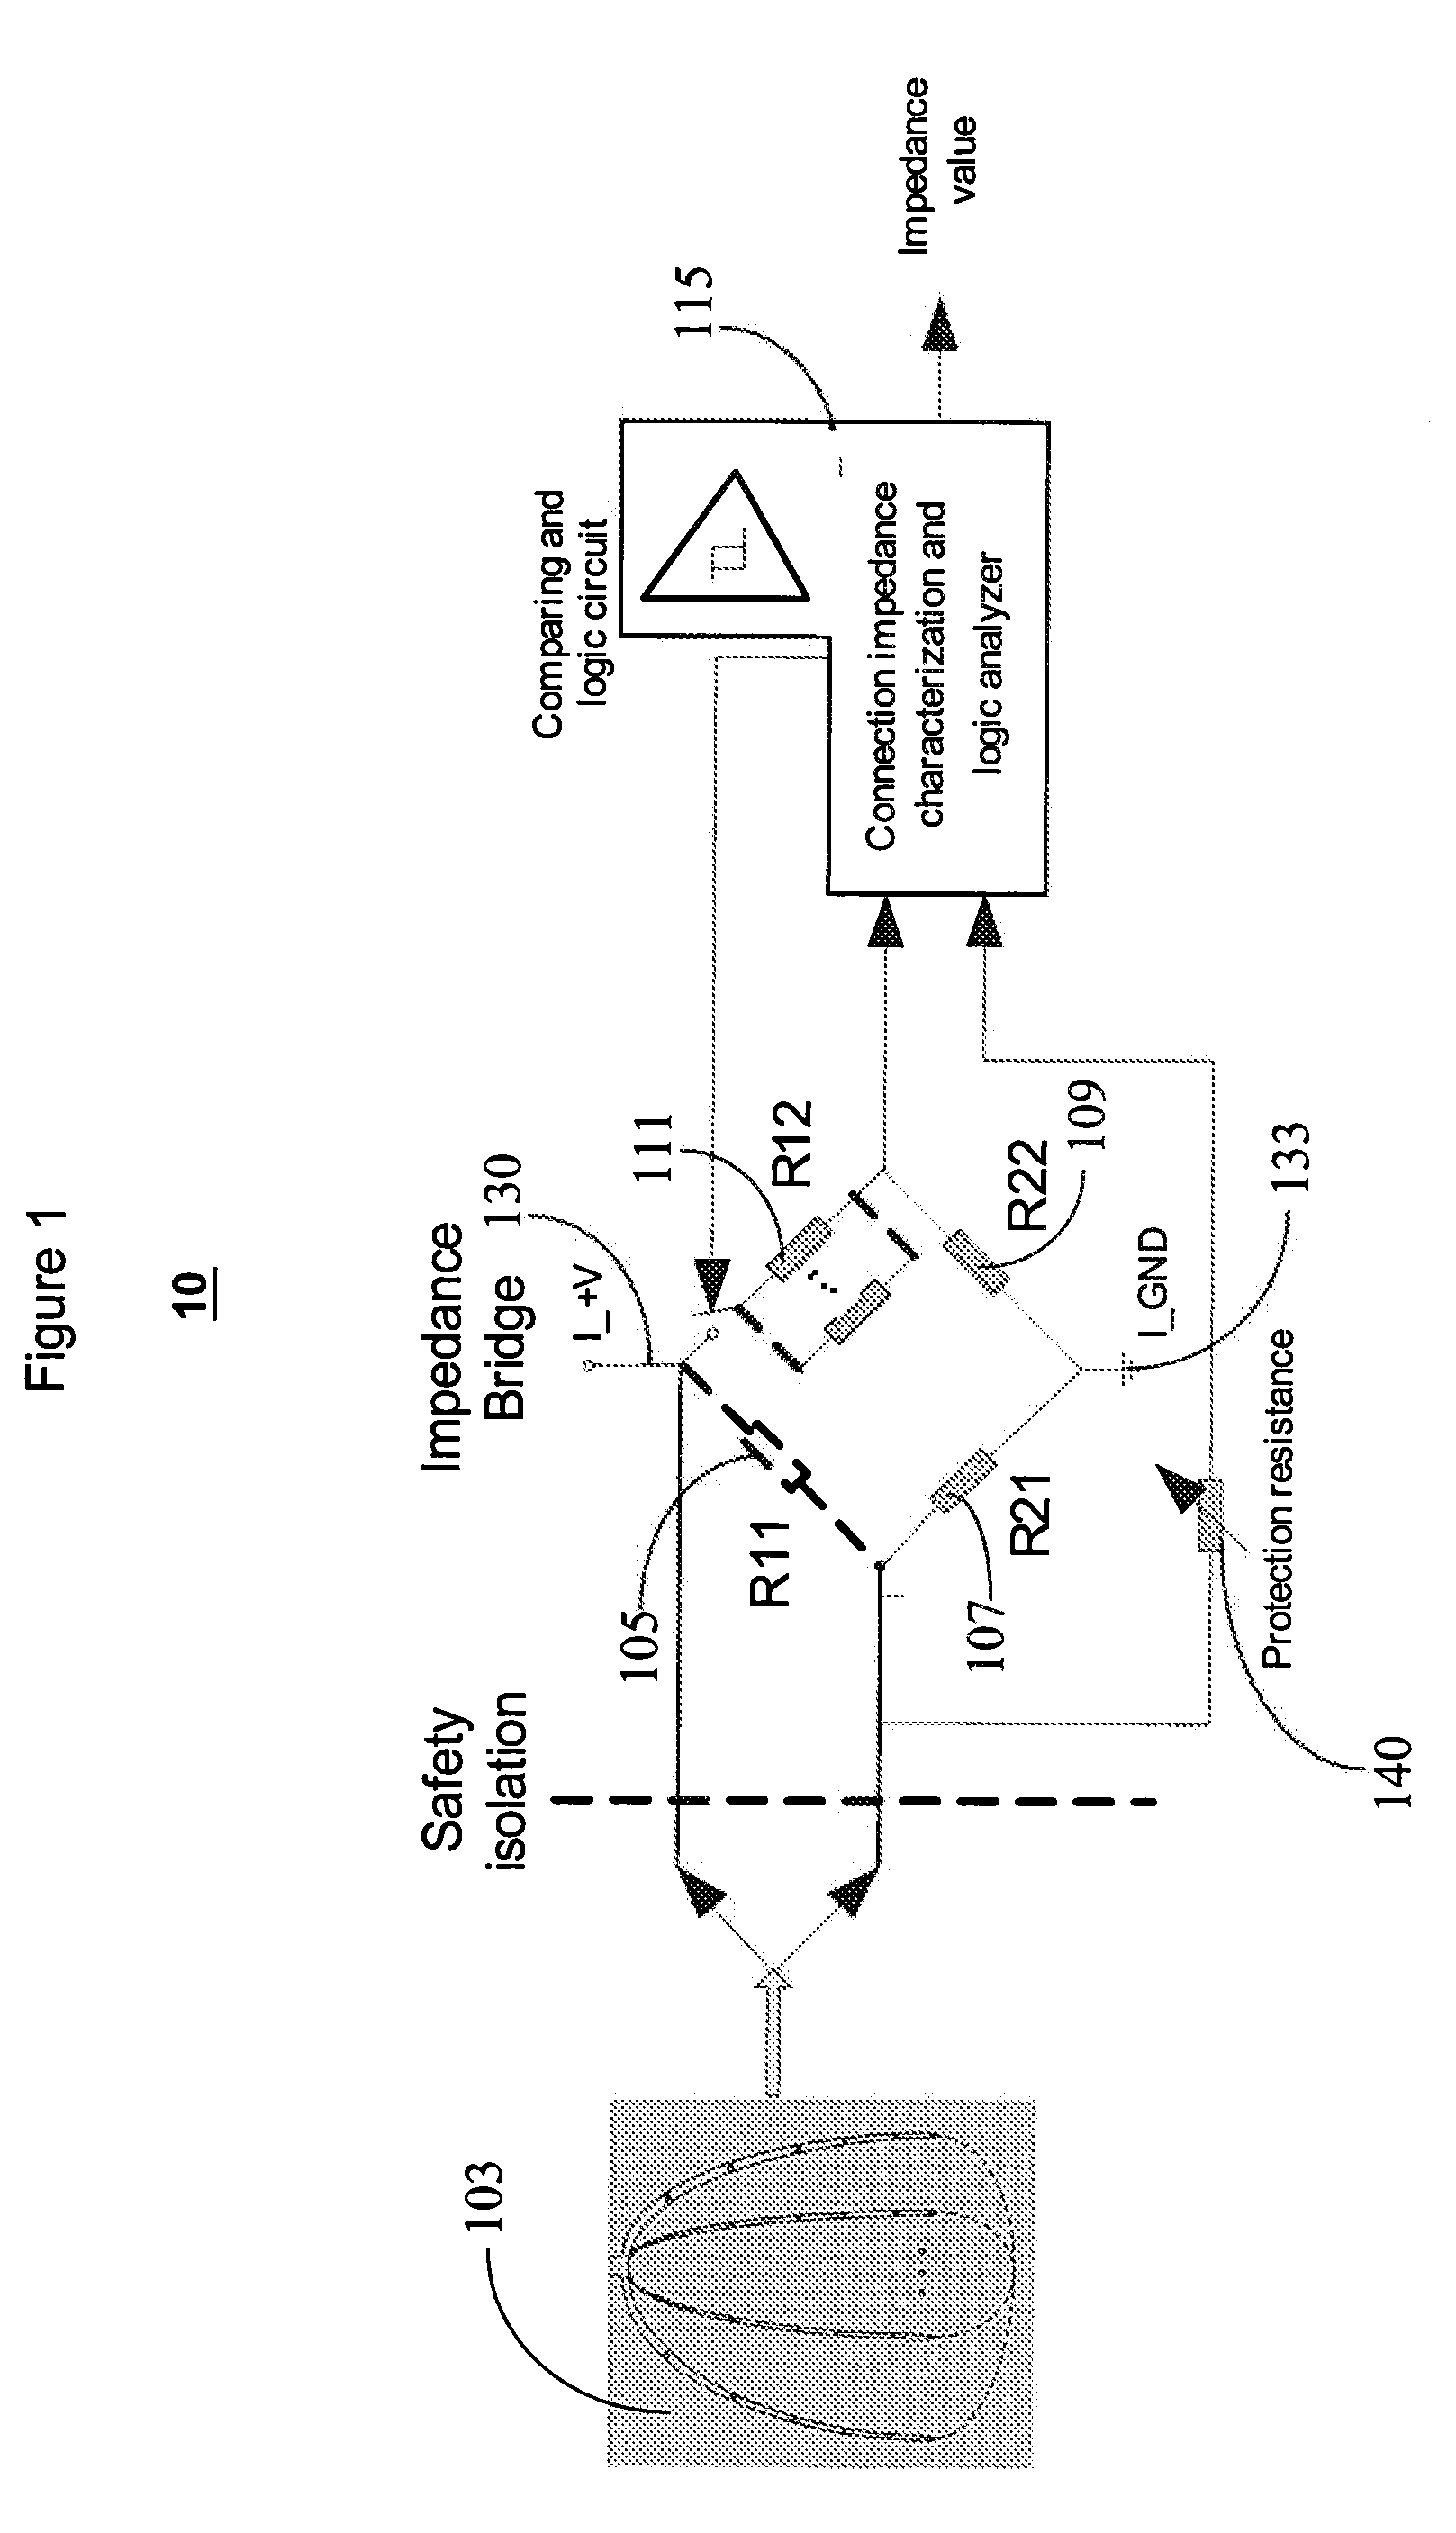 System for Characterizing Patient Tissue Impedance for Monitoring and Treatment